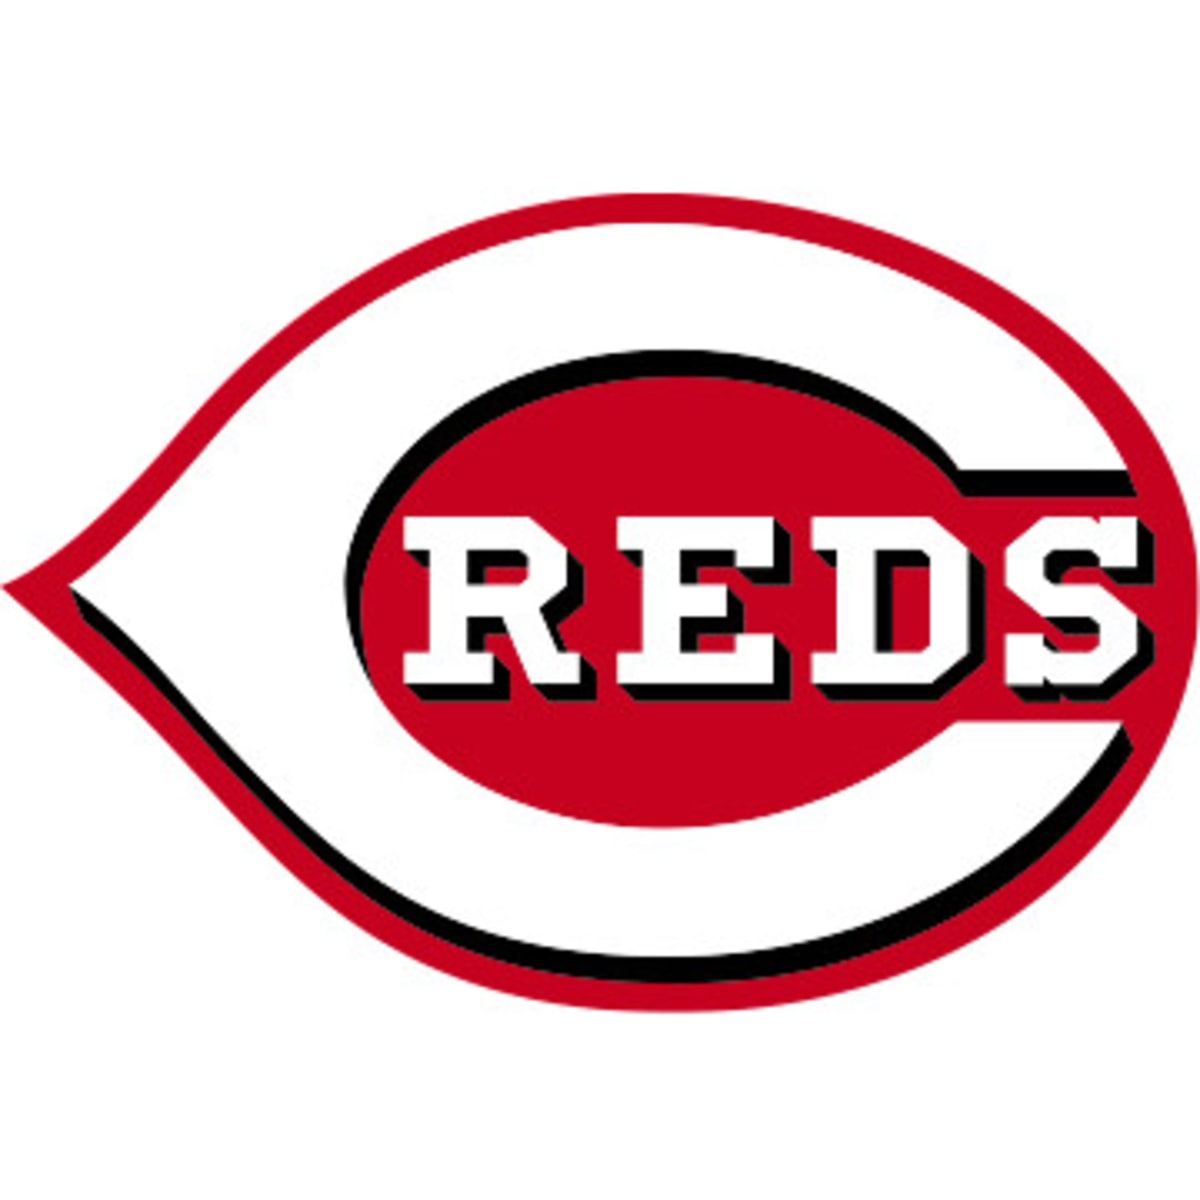 Cincinnati Reds take first place in NL Central standings